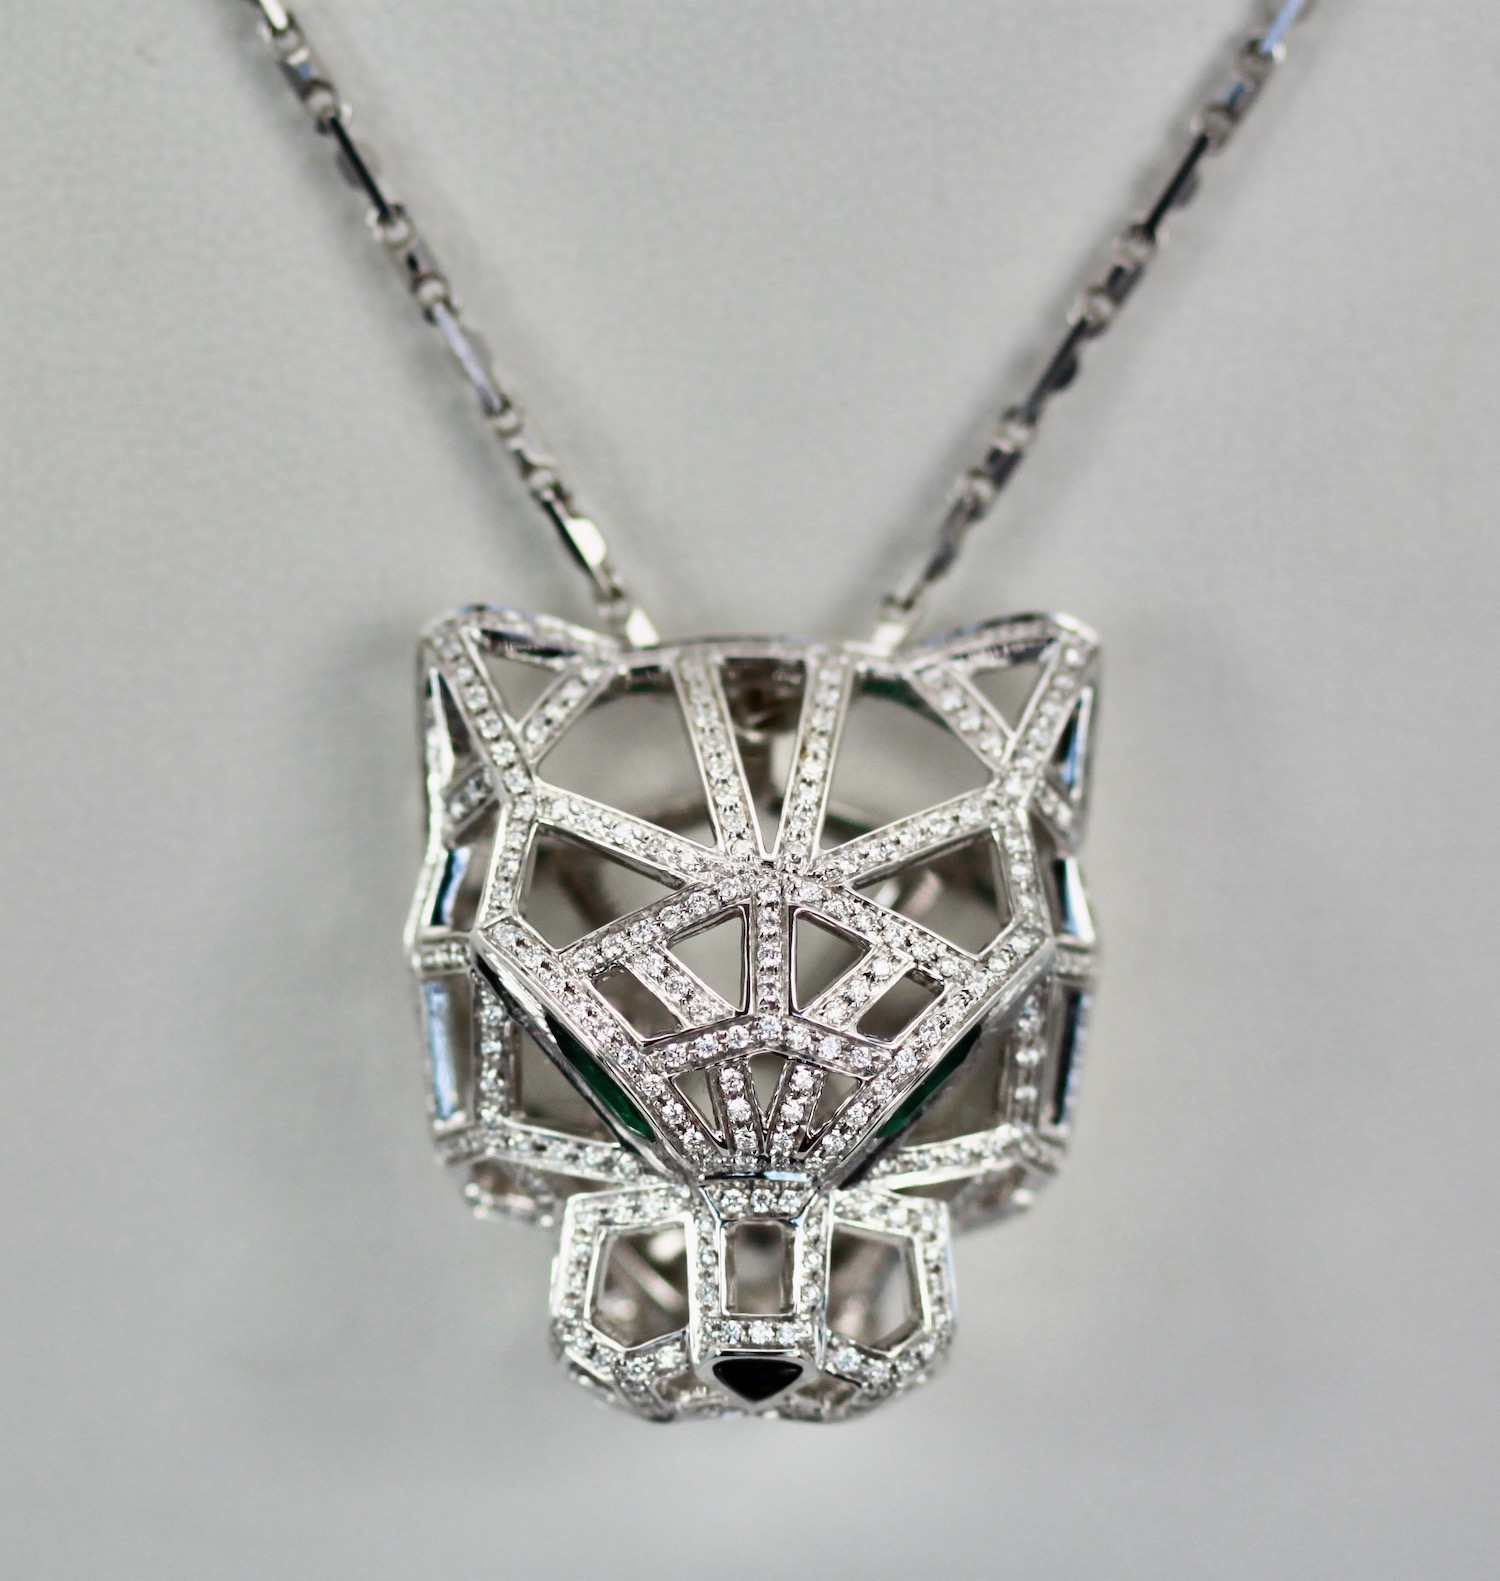 Cartier Diamond Open Panthere Pendant and Necklace – detail 2